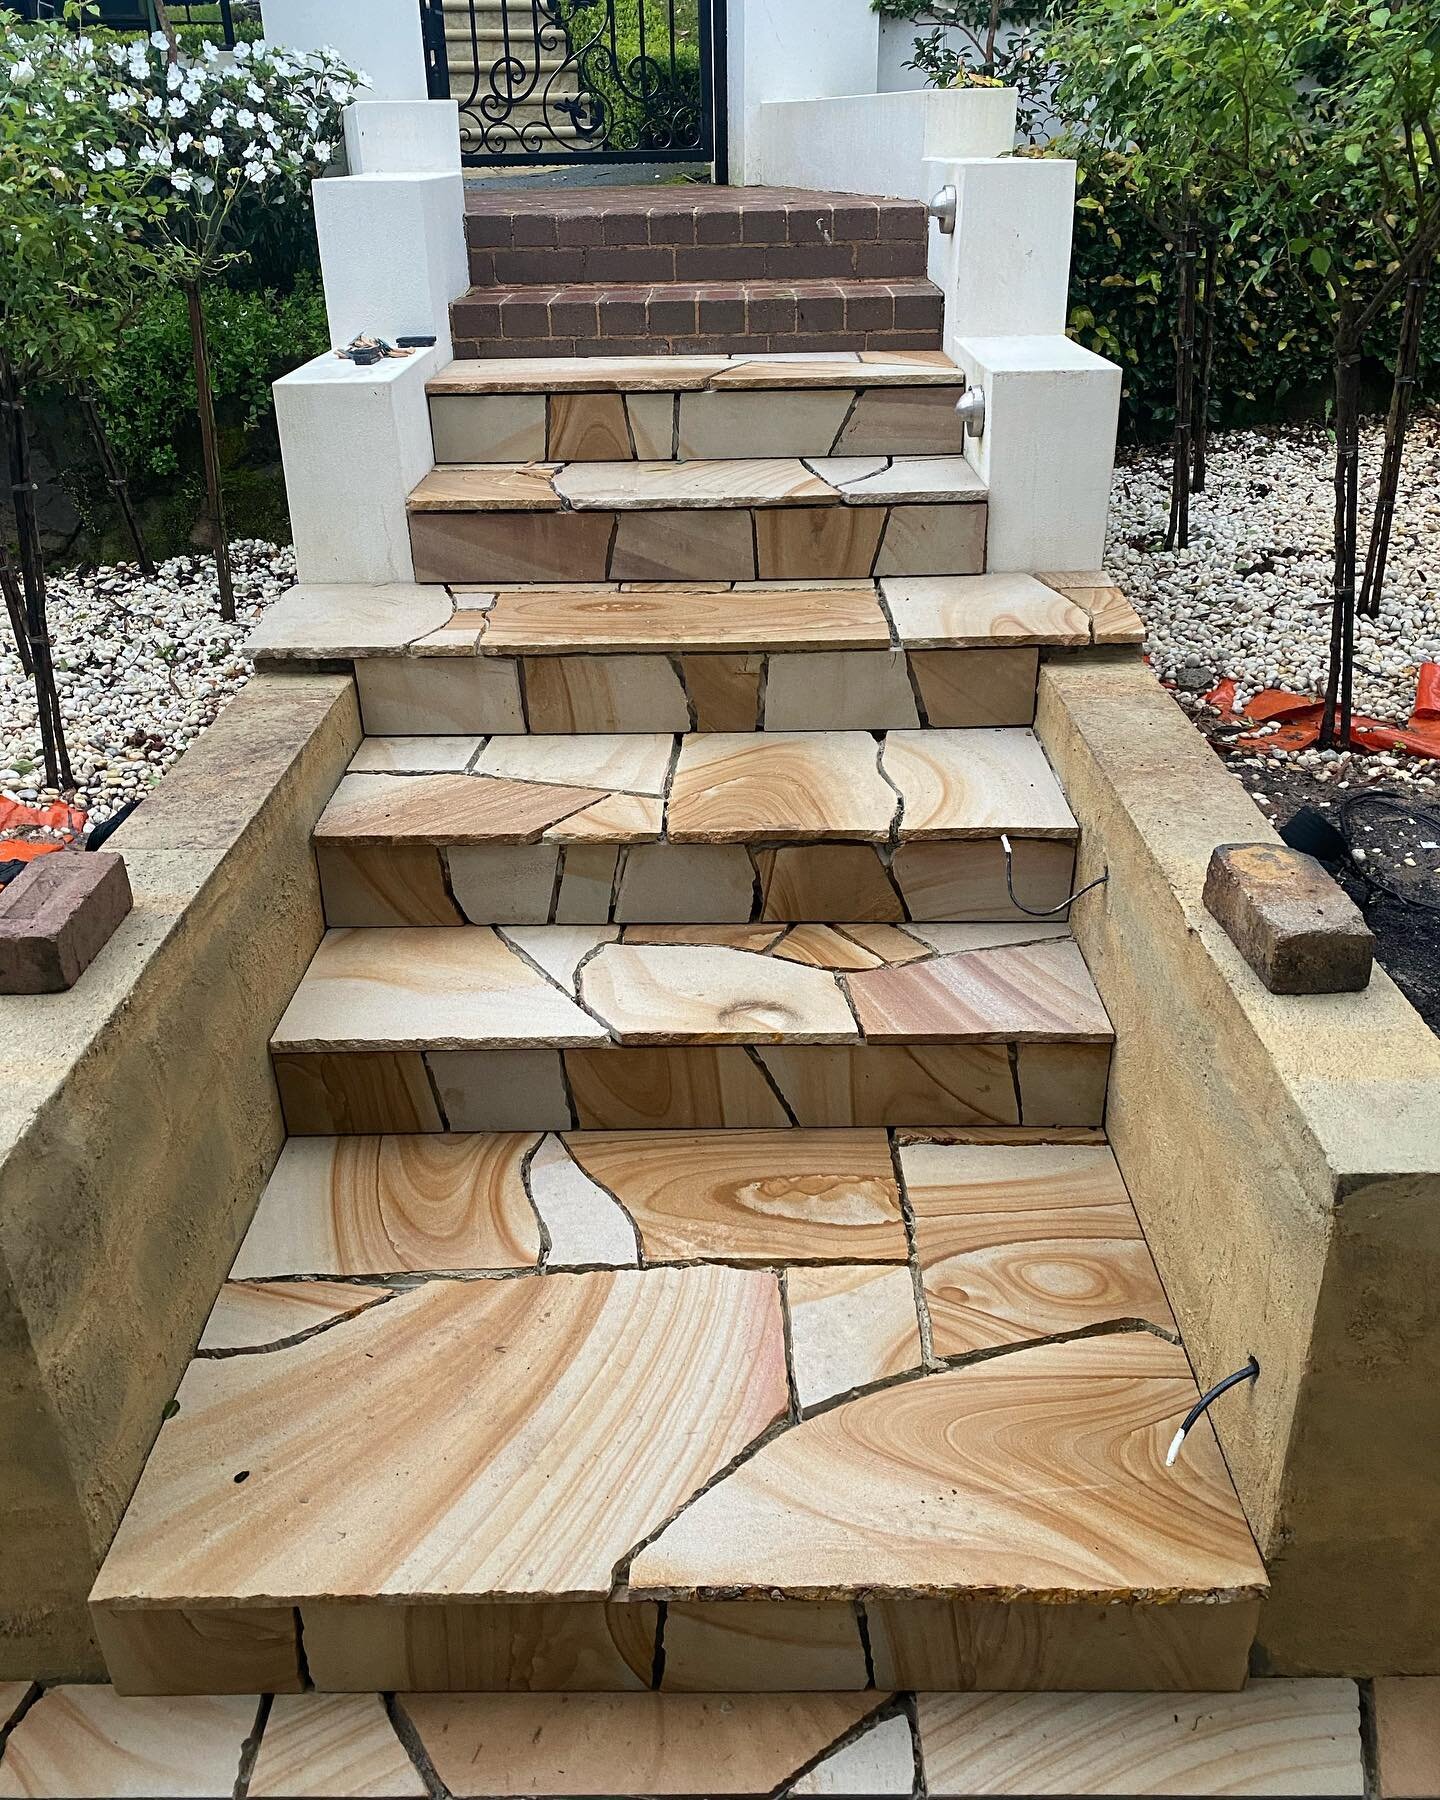 //// Quarry Blend Sandstone ////
20mm thick Crazy pave for quick and easy installation. 
Also available in Bianco White and Gold Banded. 
Quality installation by the boys at @scapezilla 

#sandstone #crazypaving #stonecollectiveoz #landscapedesign #s